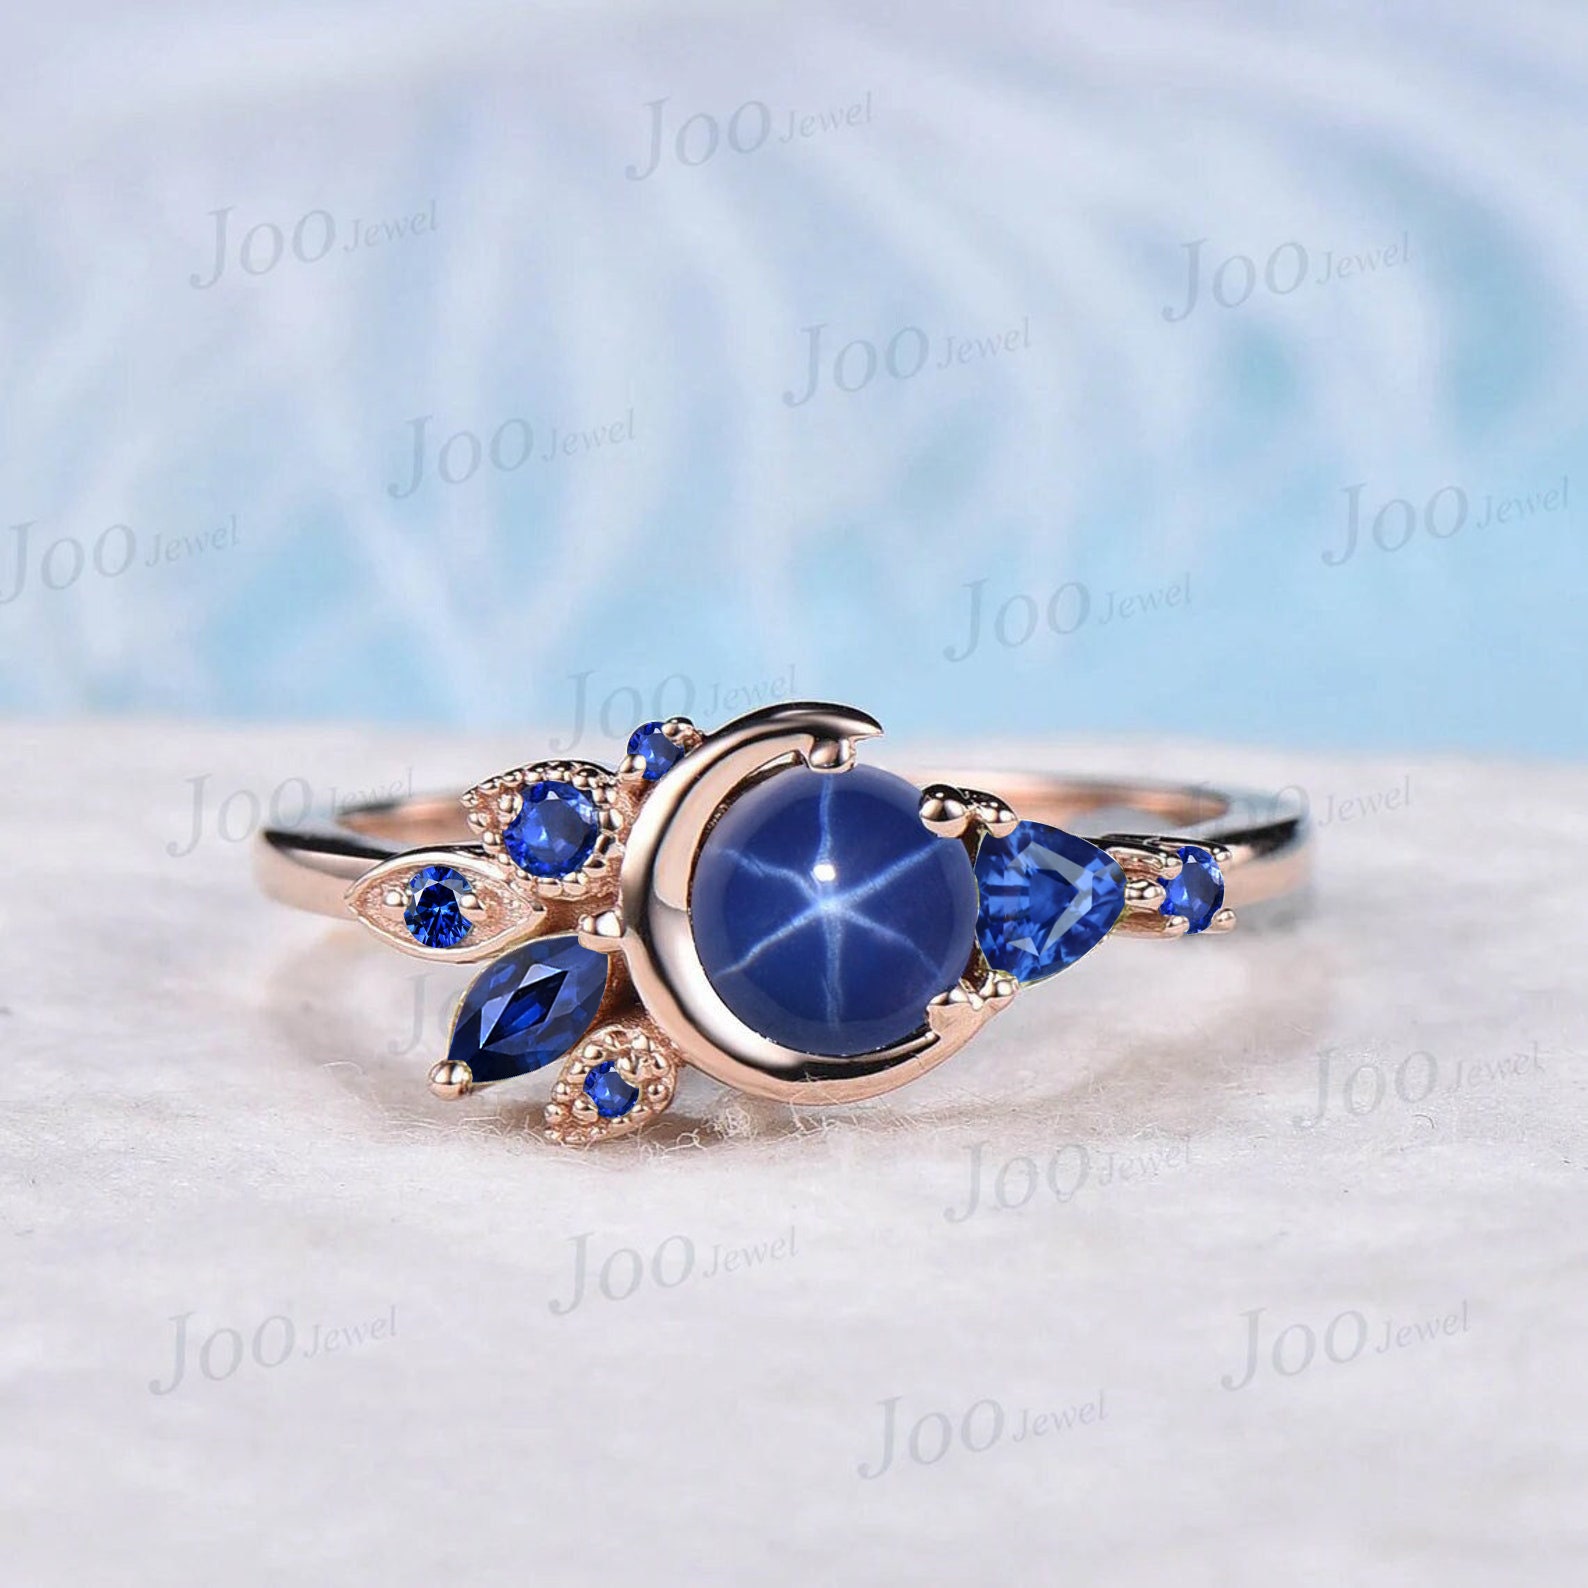 Hallmark Fine Jewelry Midnight Sky Crescent Moon Ring in Sterling Silver & 14K Yellow Gold with Created Blue Sapphires and Diamond 6 by Hallmark